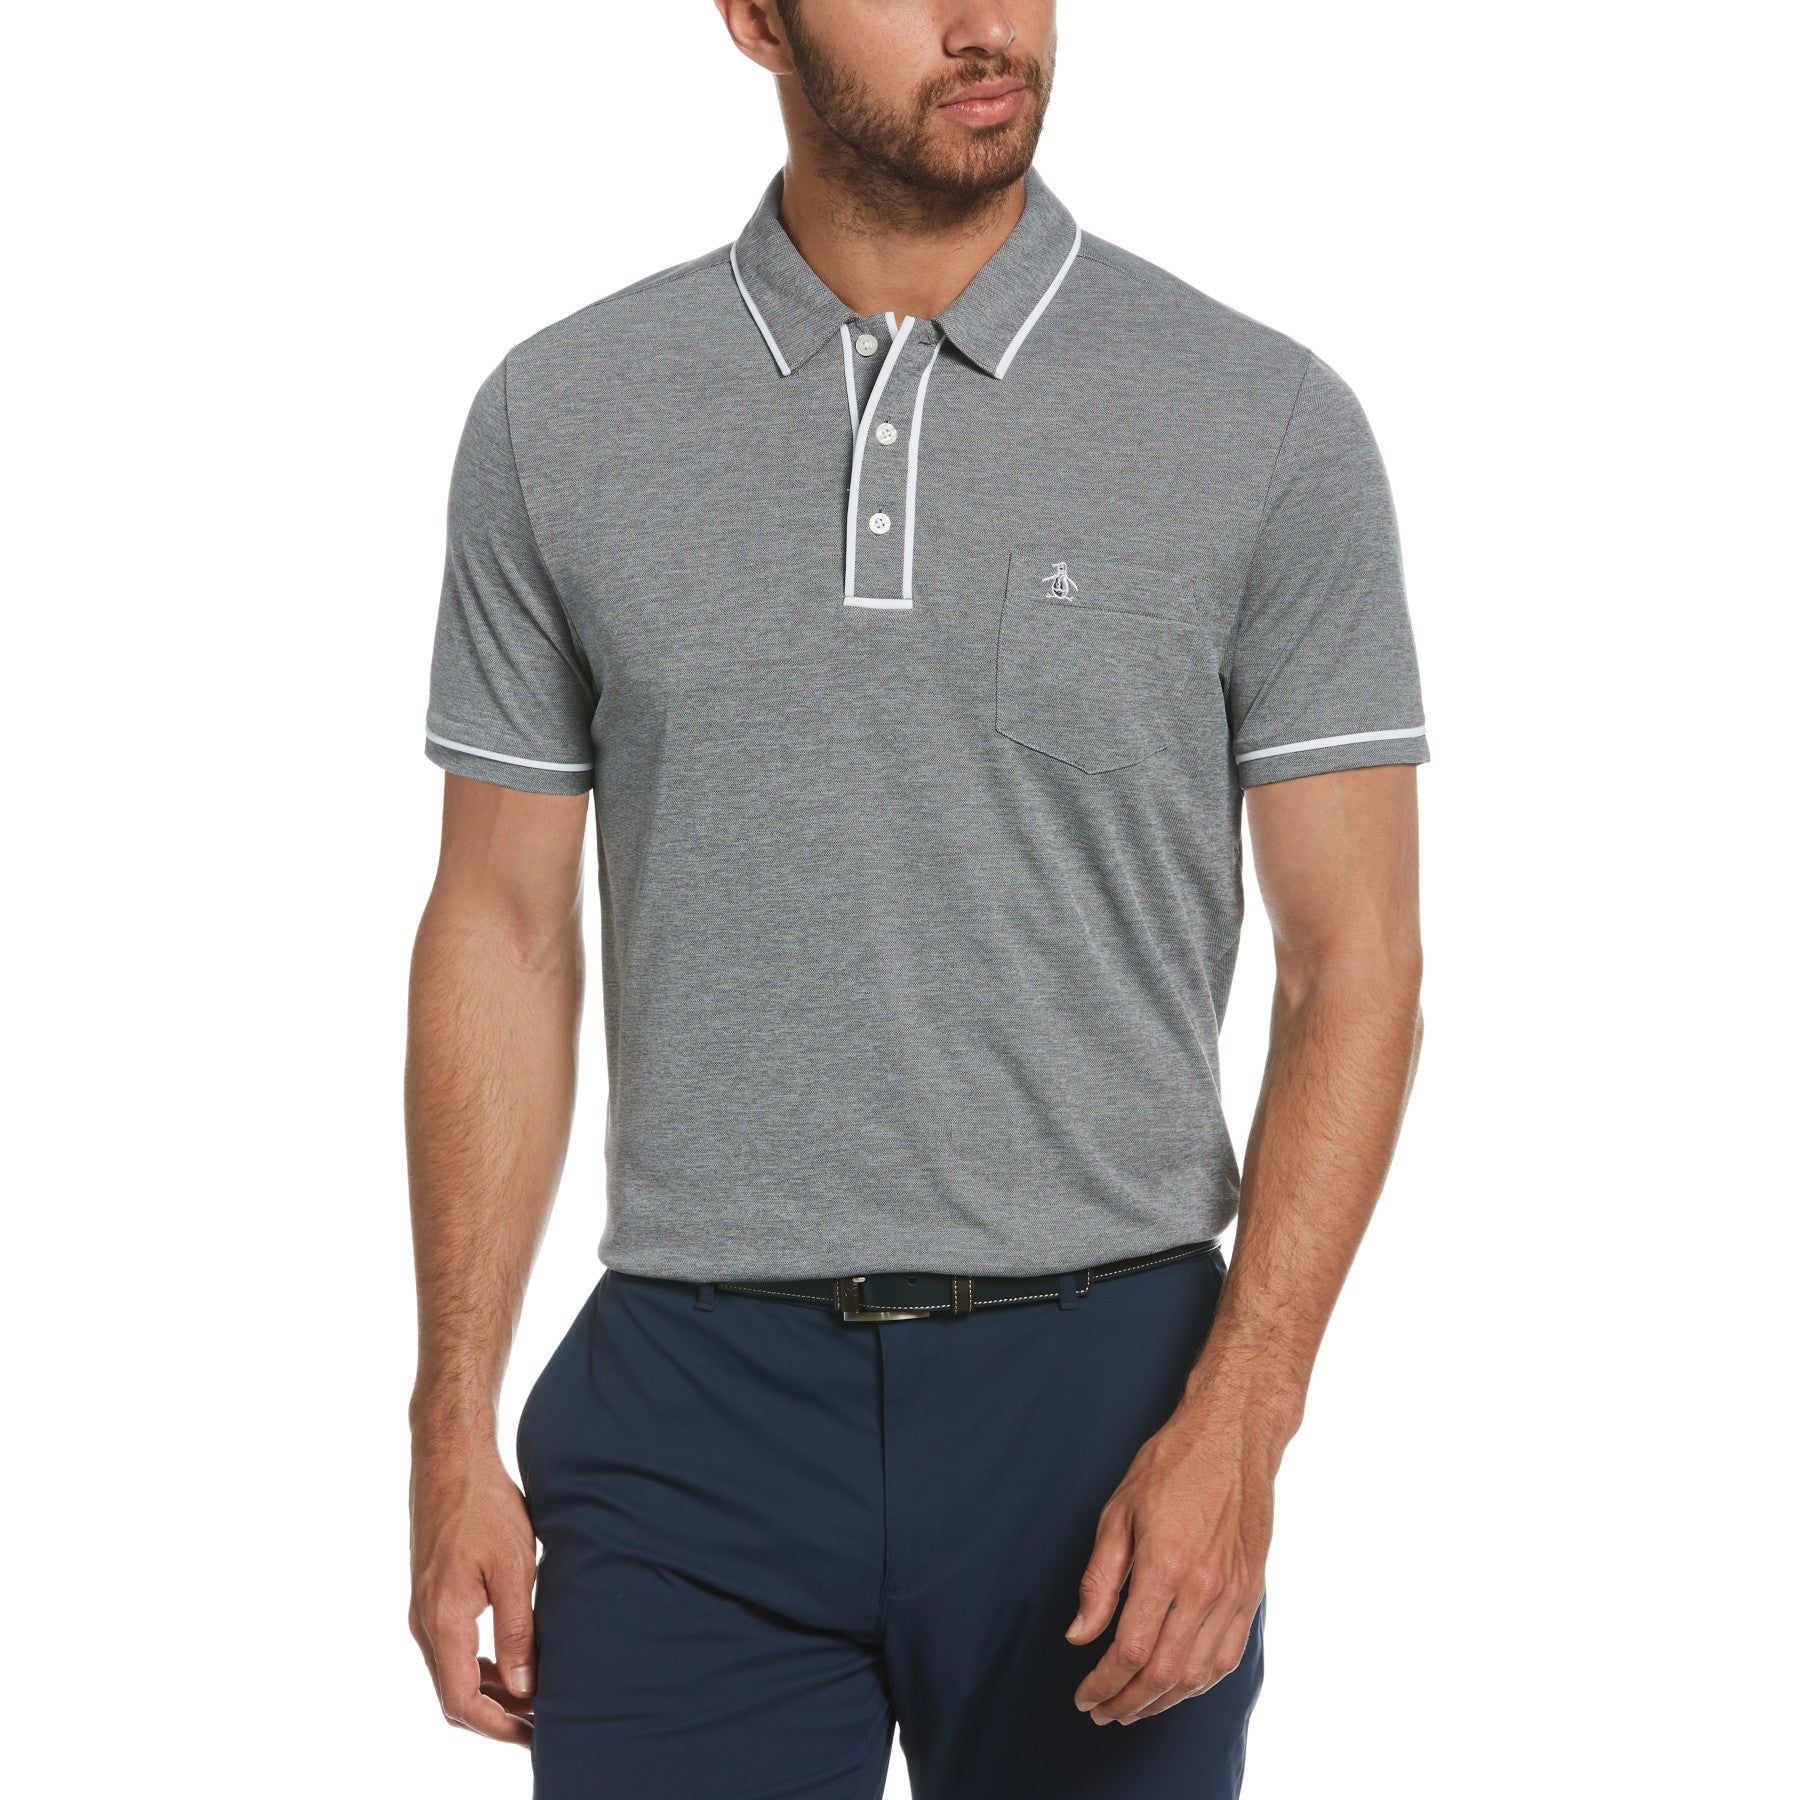 View Eco Performance Earl Golf Polo Shirt In Asphalt information